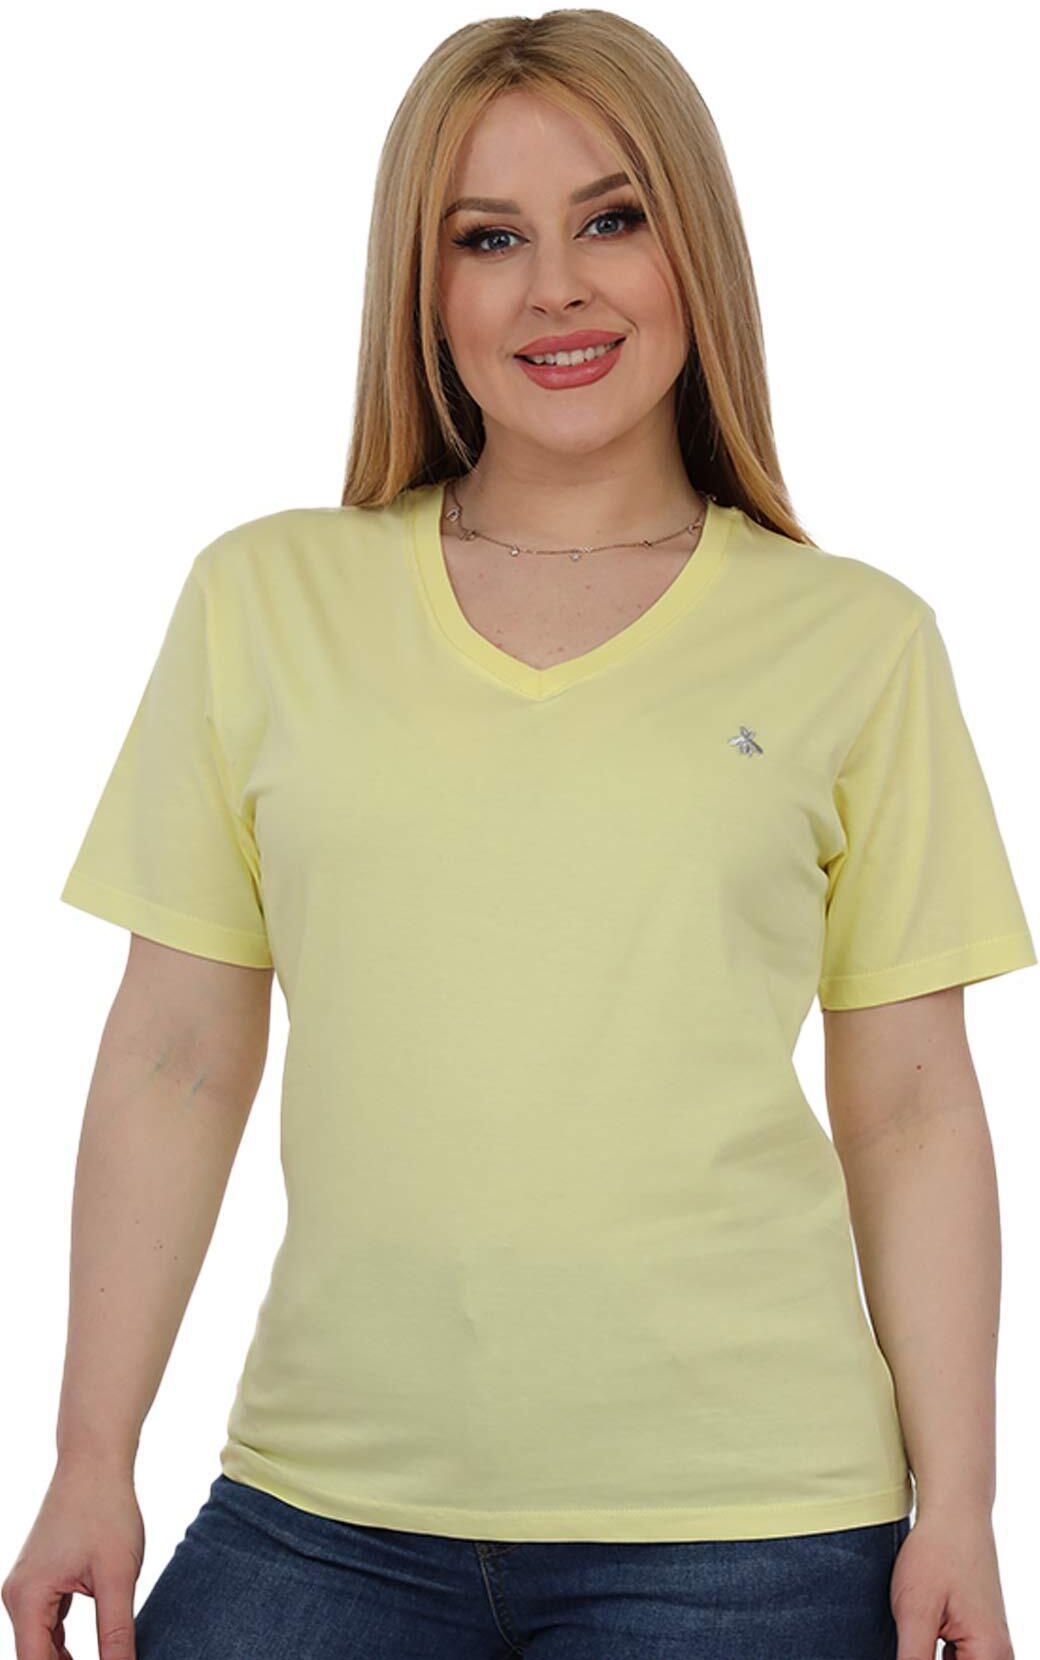 La Collection T-Shirt for Women - 2X Large - Yellow